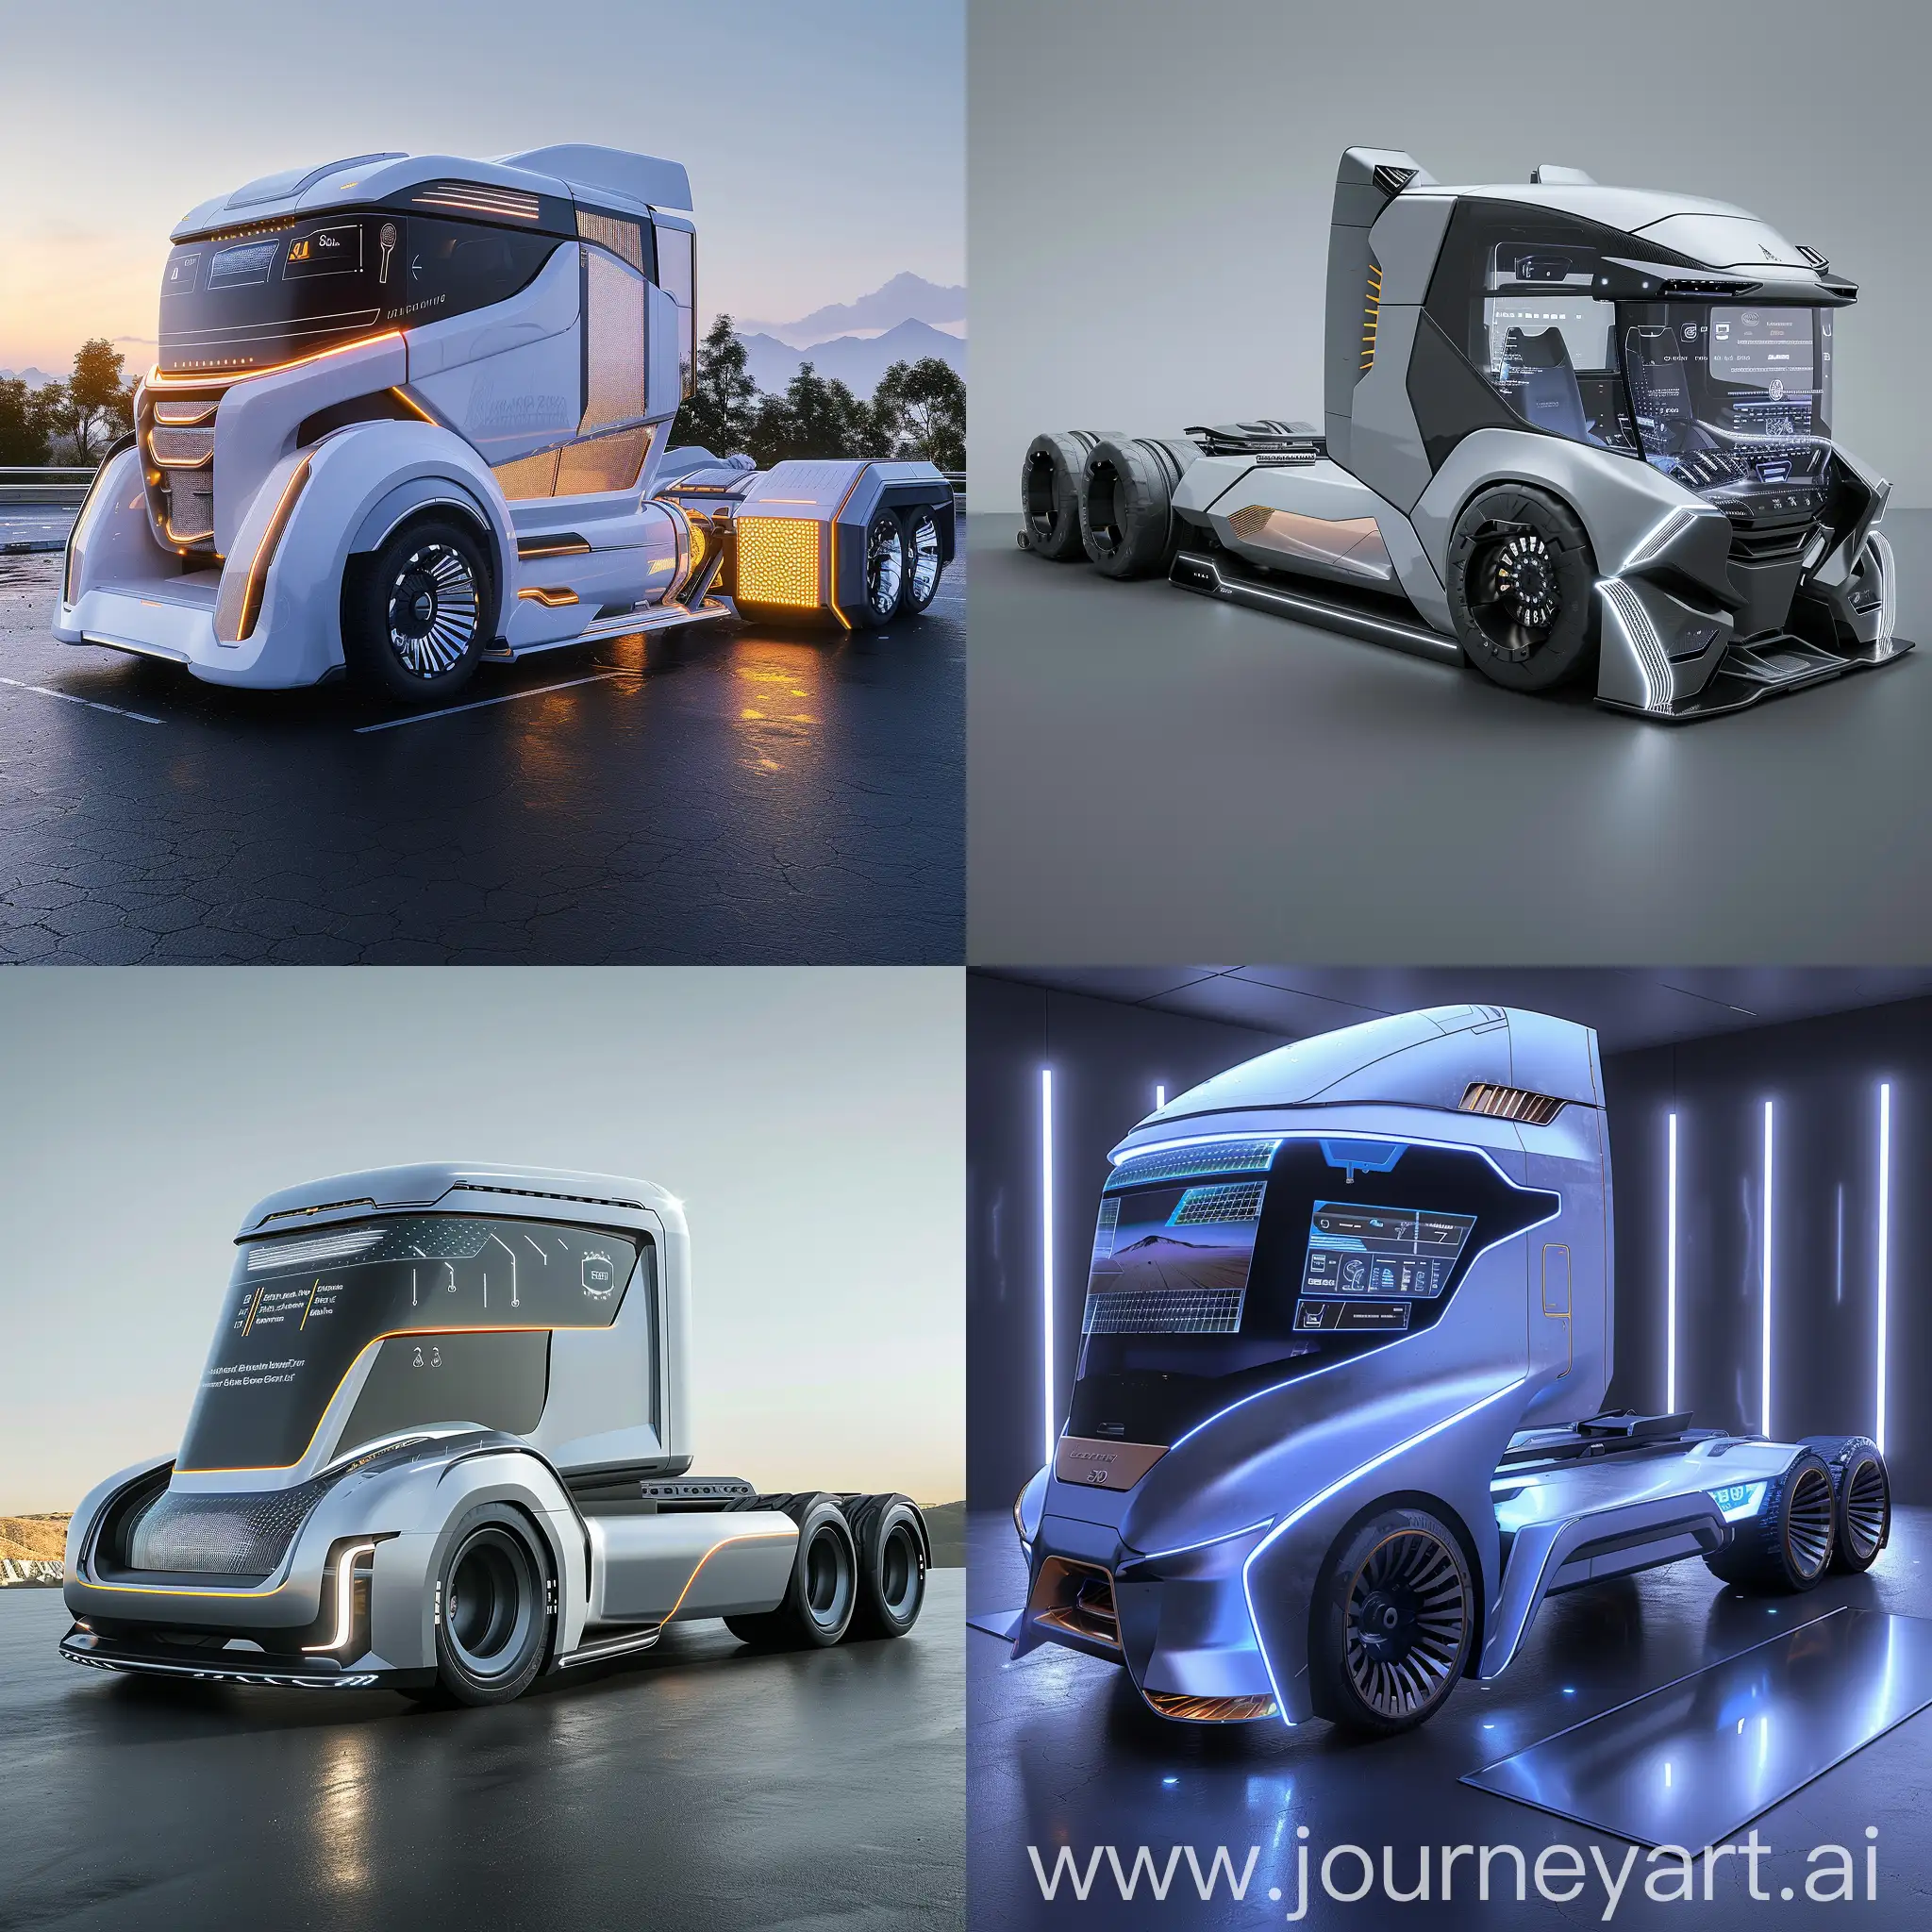 High-tech futuristic truck, Autonomous Driving System, Augmented Reality Dashboard, Biometric Recognition Technology, Energy-Efficient Powertrain, Holographic Heads-Up Display, Smart Climate Control System, Intelligent Connectivity Features, Advanced Safety Sensors, Adaptive Suspension System, Modular Interior Design, Sleek Aerodynamic Body, Integrated LED Lighting, Smart Active Grille, Solar Panel Roof, Retractable Side Steps, 360-Degree Camera System, Dynamic Paint Finish, Electrically Controlled Tailgate, Innovative Wheel Design, Integrated Cargo Management System, unreal engine 5 --stylize 1000